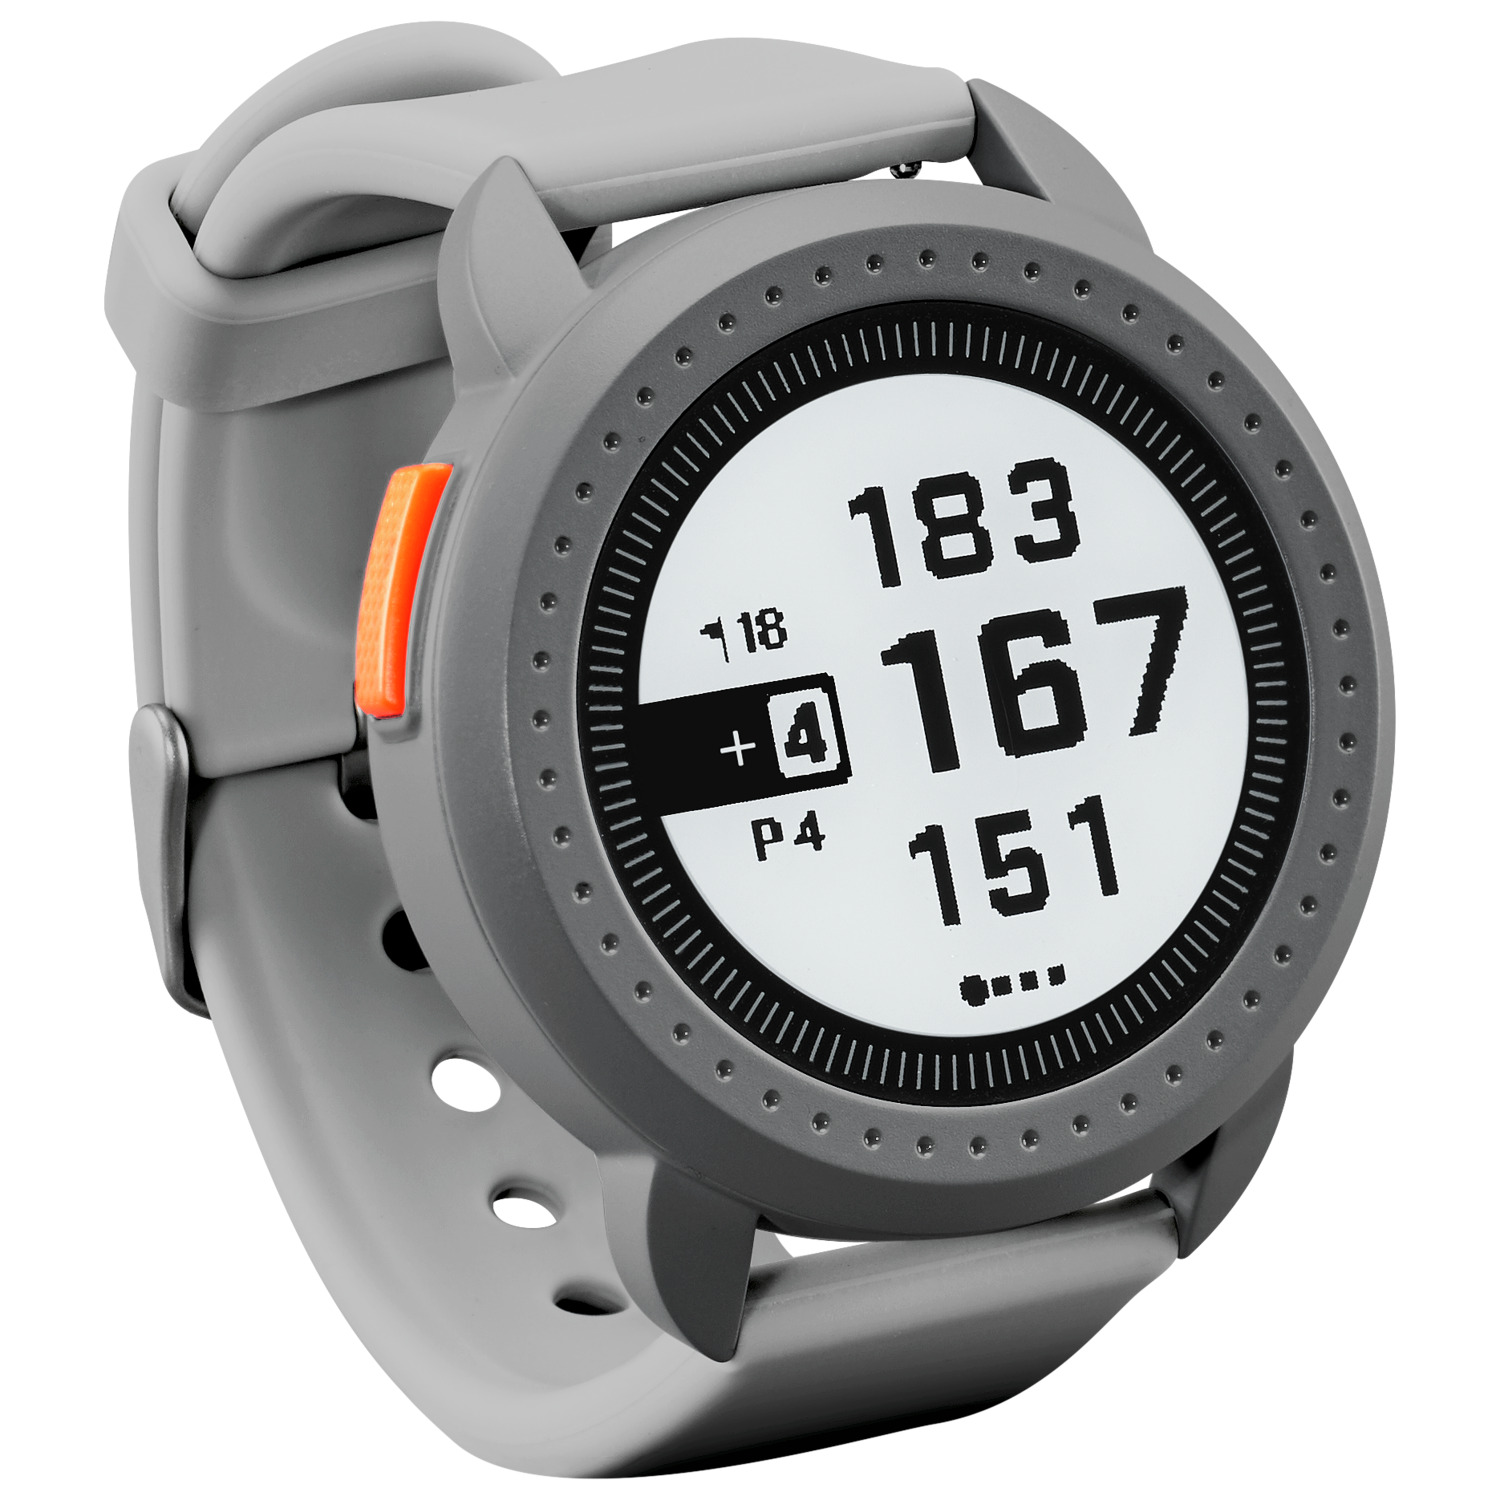 Bushnell GPS Ion Edge Golf Watch 36,000+ Courses loaded, Bluetooth, 15hr Battery